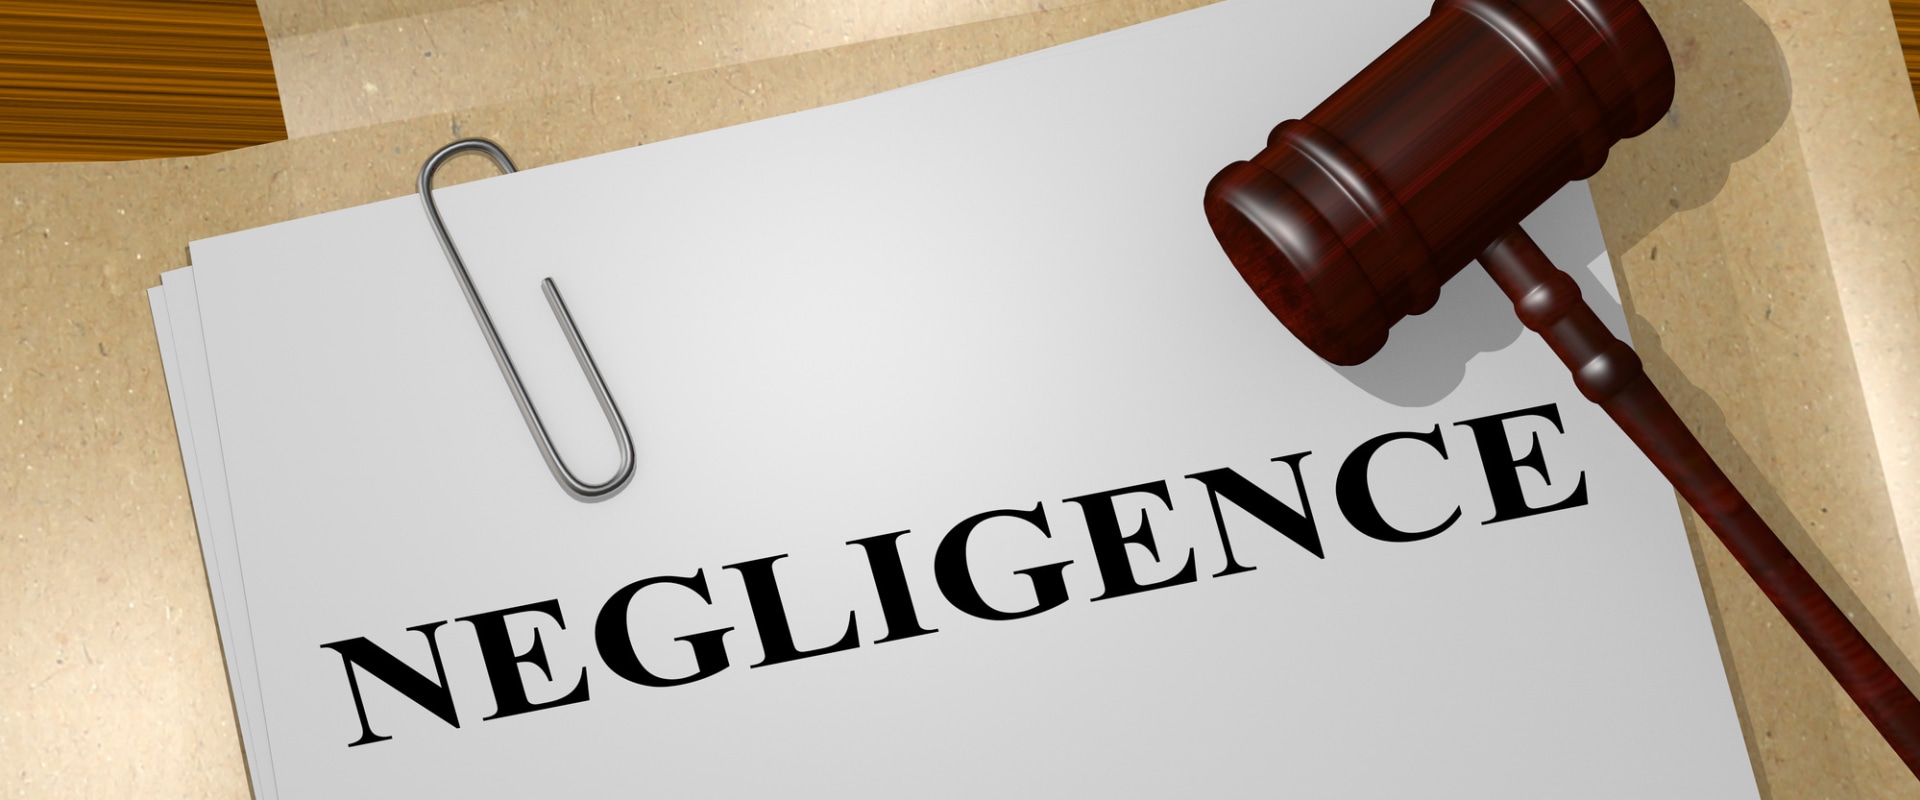 What are the elements that must be proven in a negligence case?